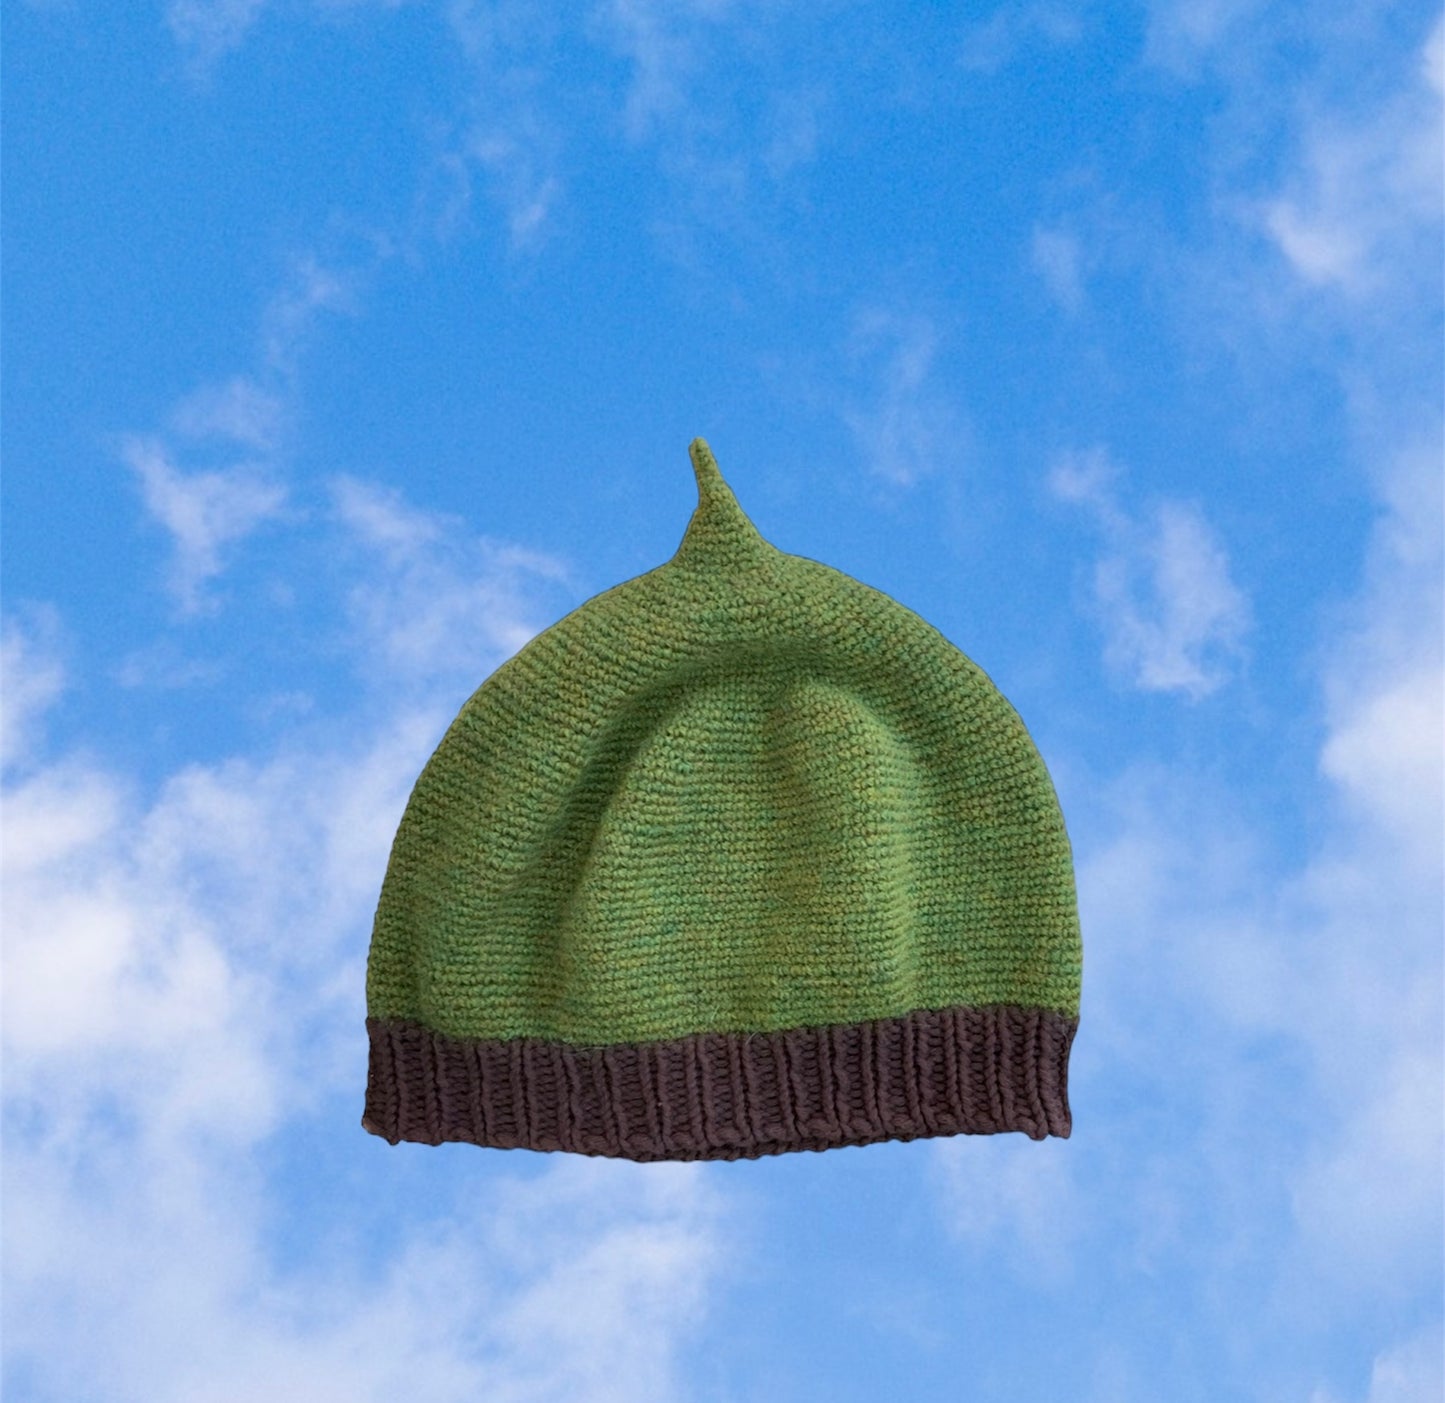 Green and Brown Acorn Hat